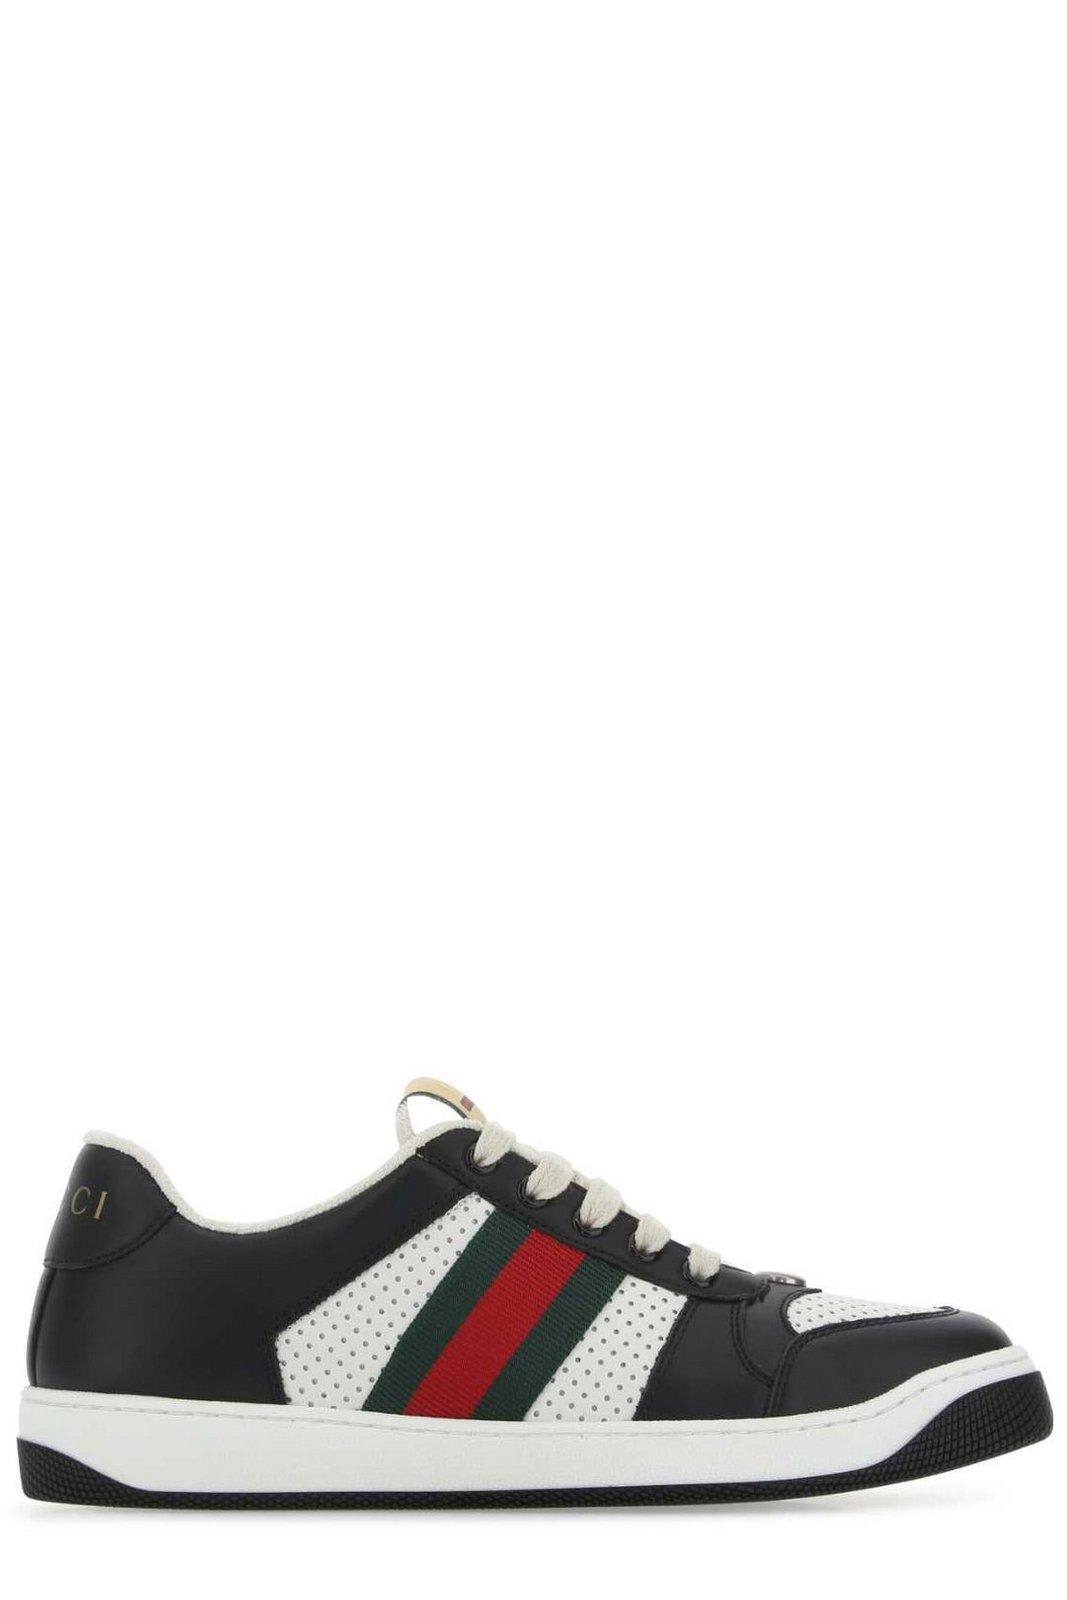 Shop Gucci Screener Laced Low-top Sneakers